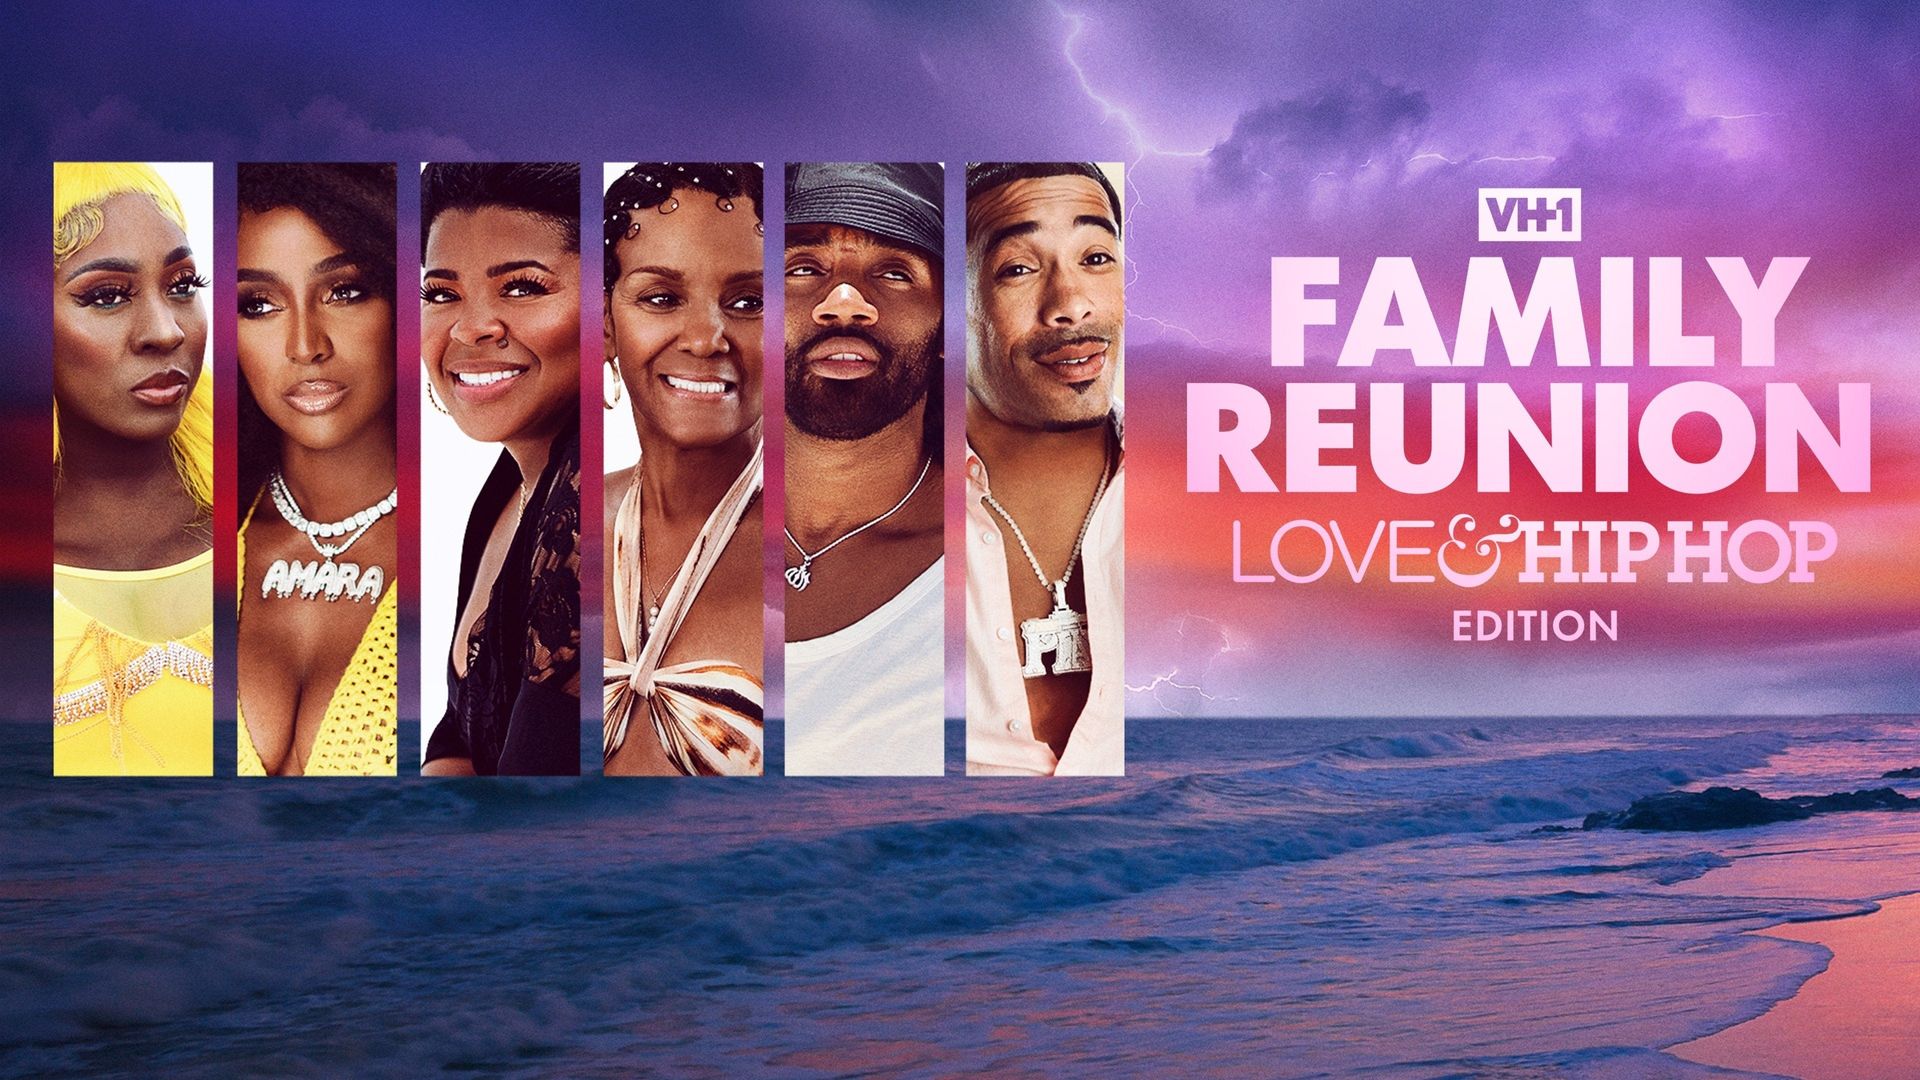 VH1 Family Reunion: Love & Hip Hop Edition background